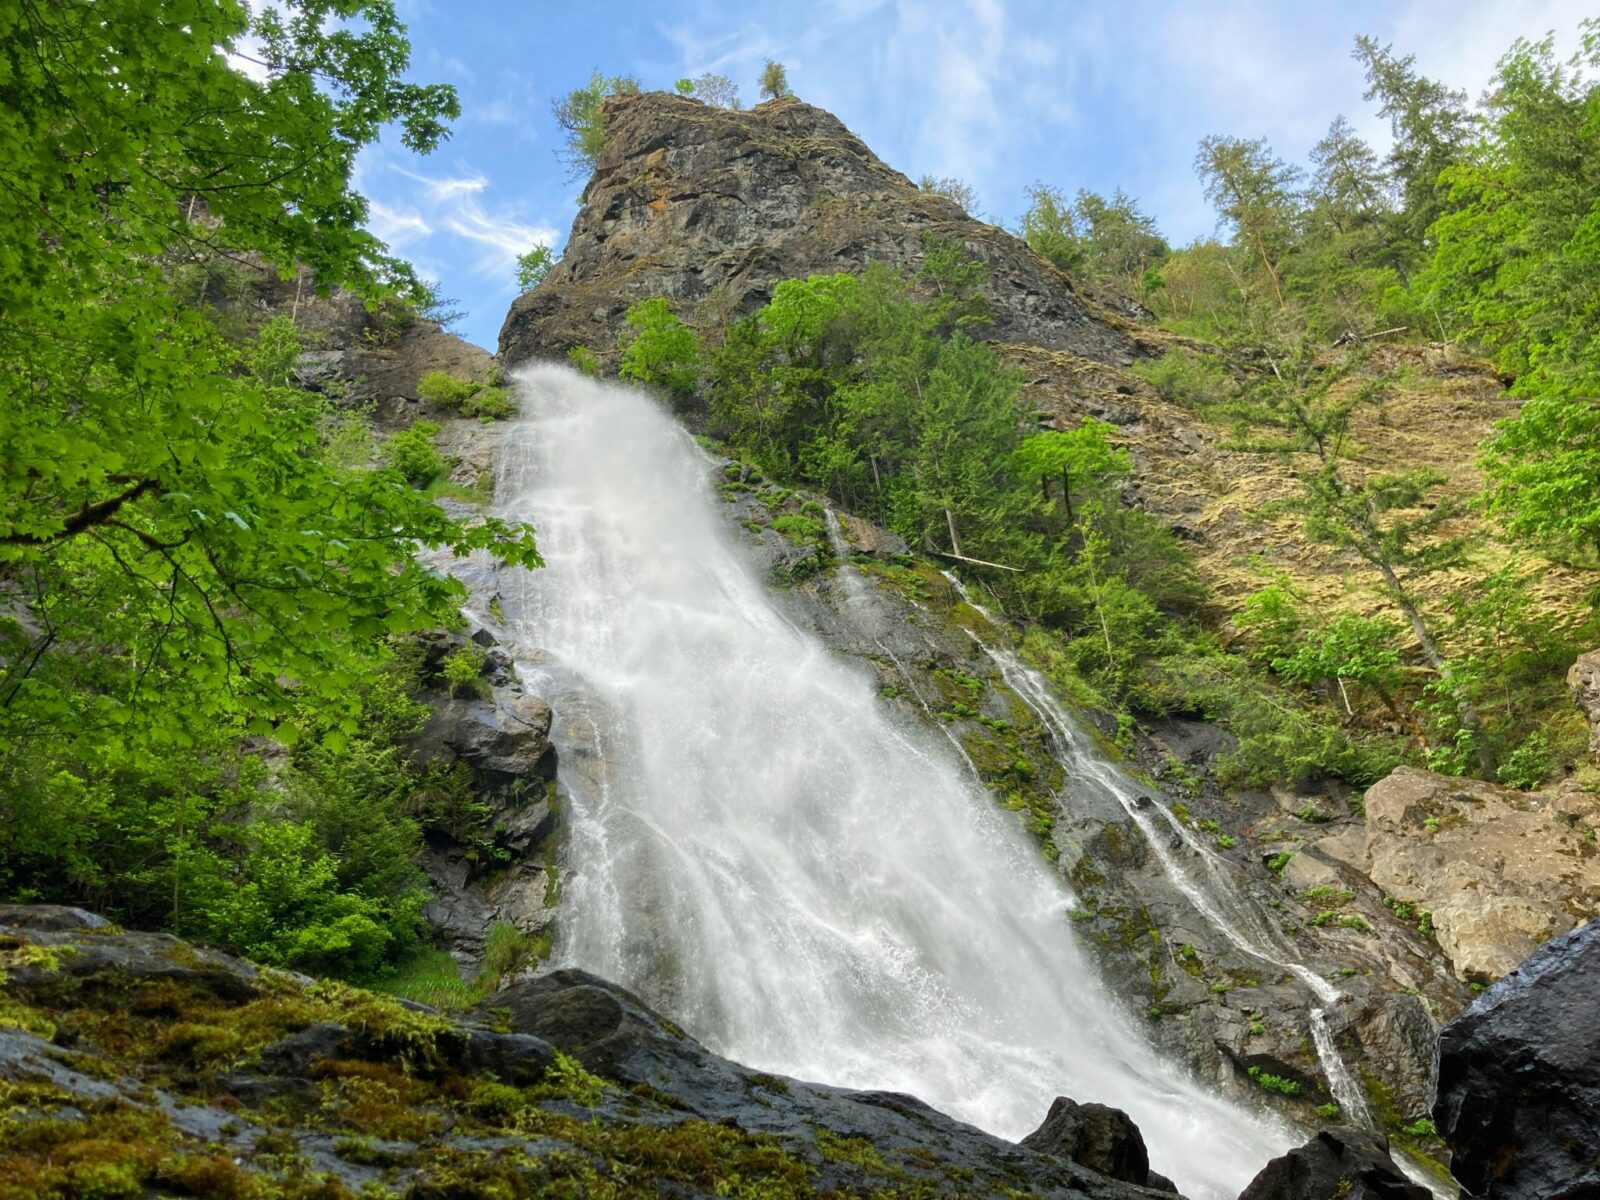 A wide waterfall seeing from below coming over a boulder field with rocks and trees on each side